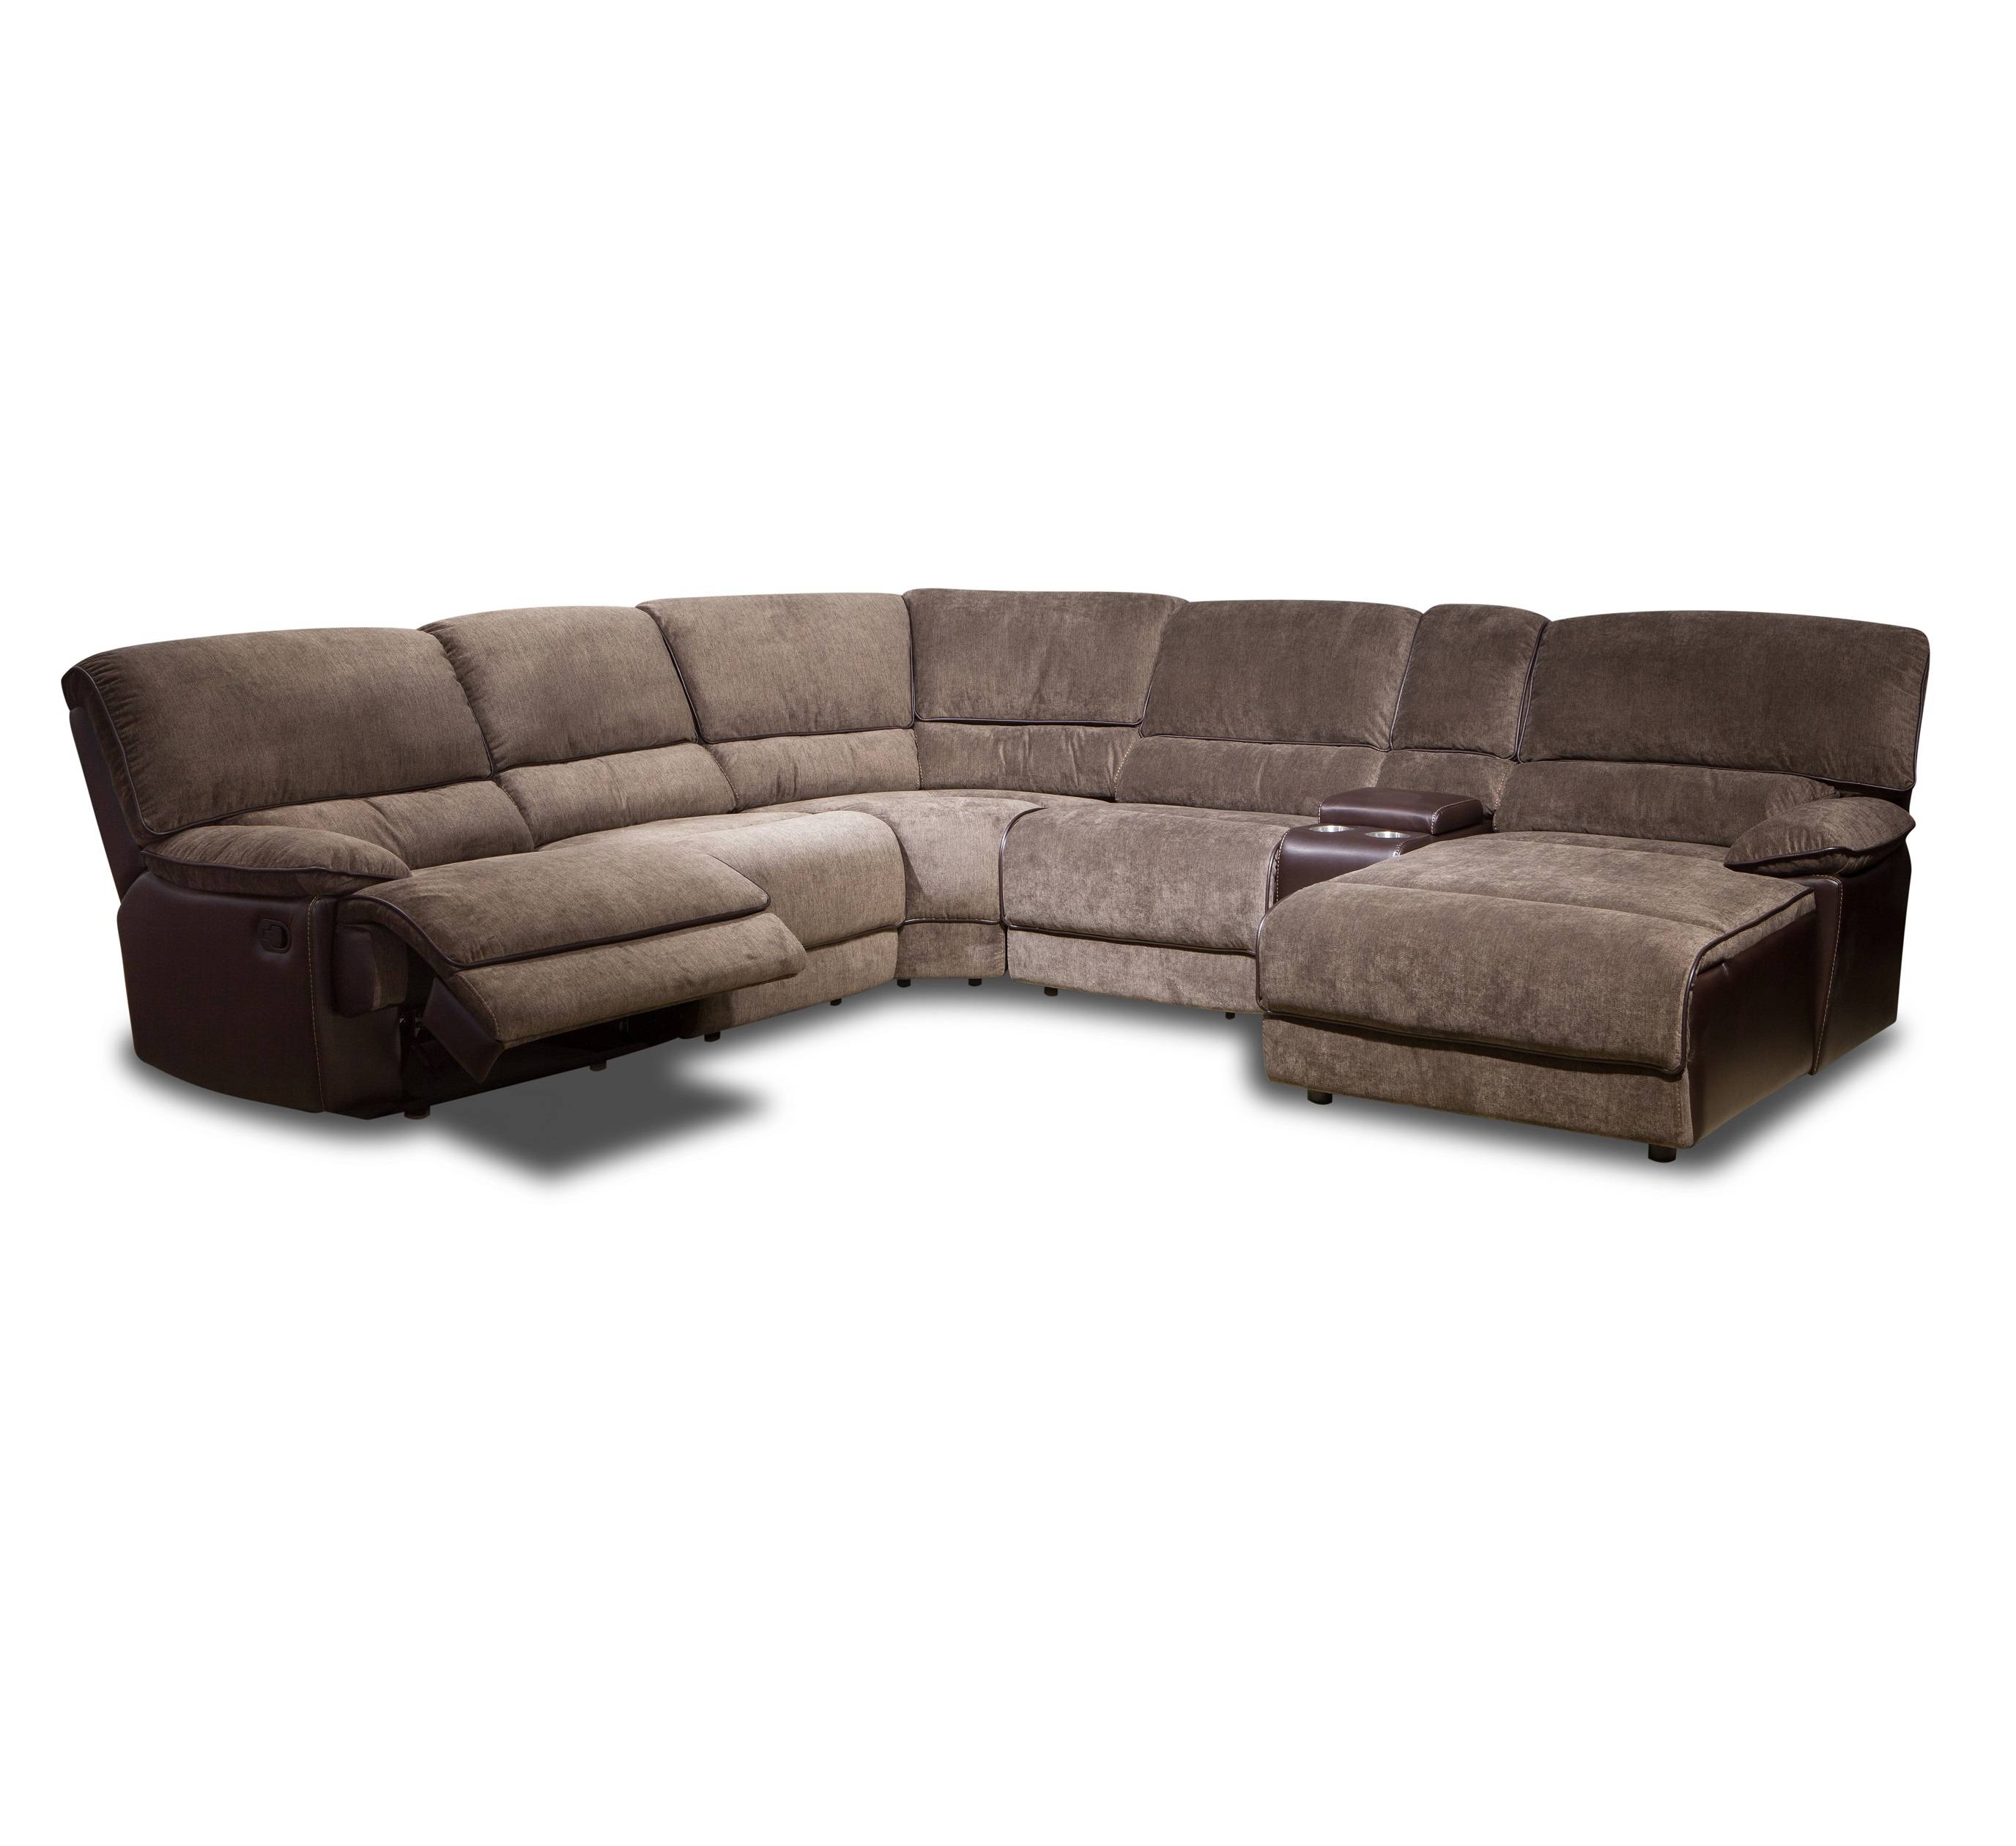 American style fancy relax fabric recliner sectional sofa with cup holder